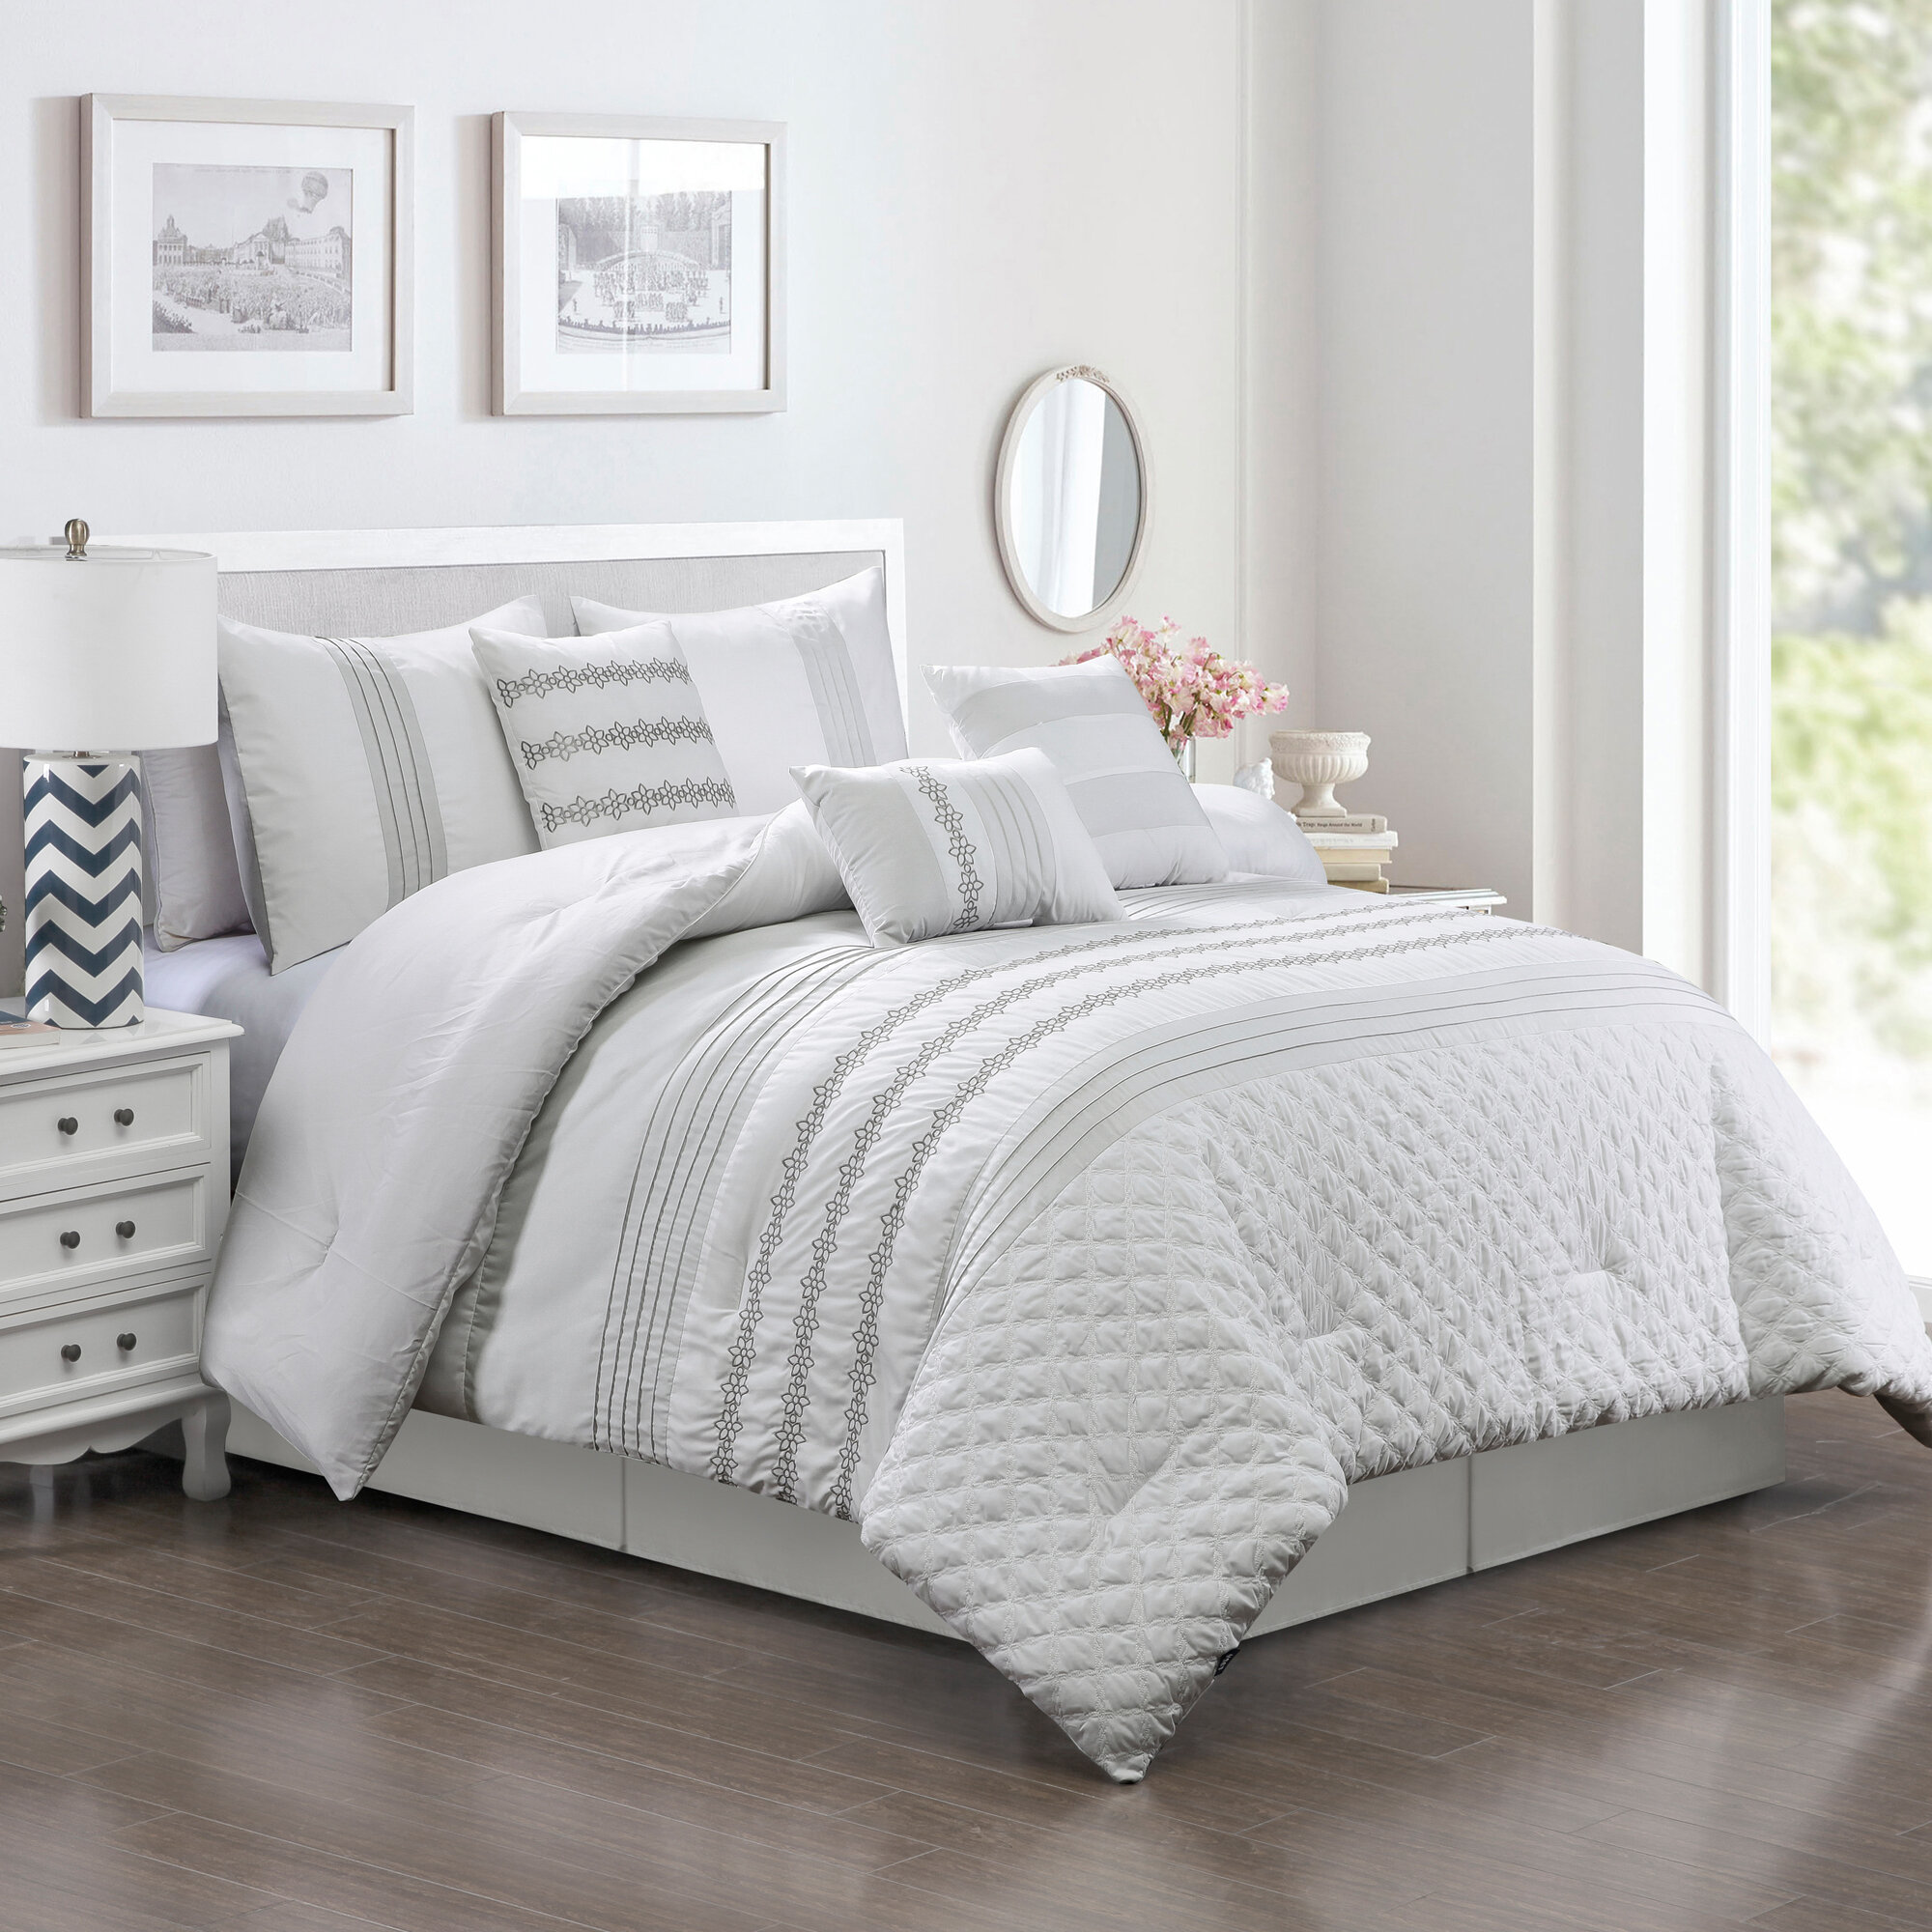 Aesthetic Bed Set - Homey Like Your Home